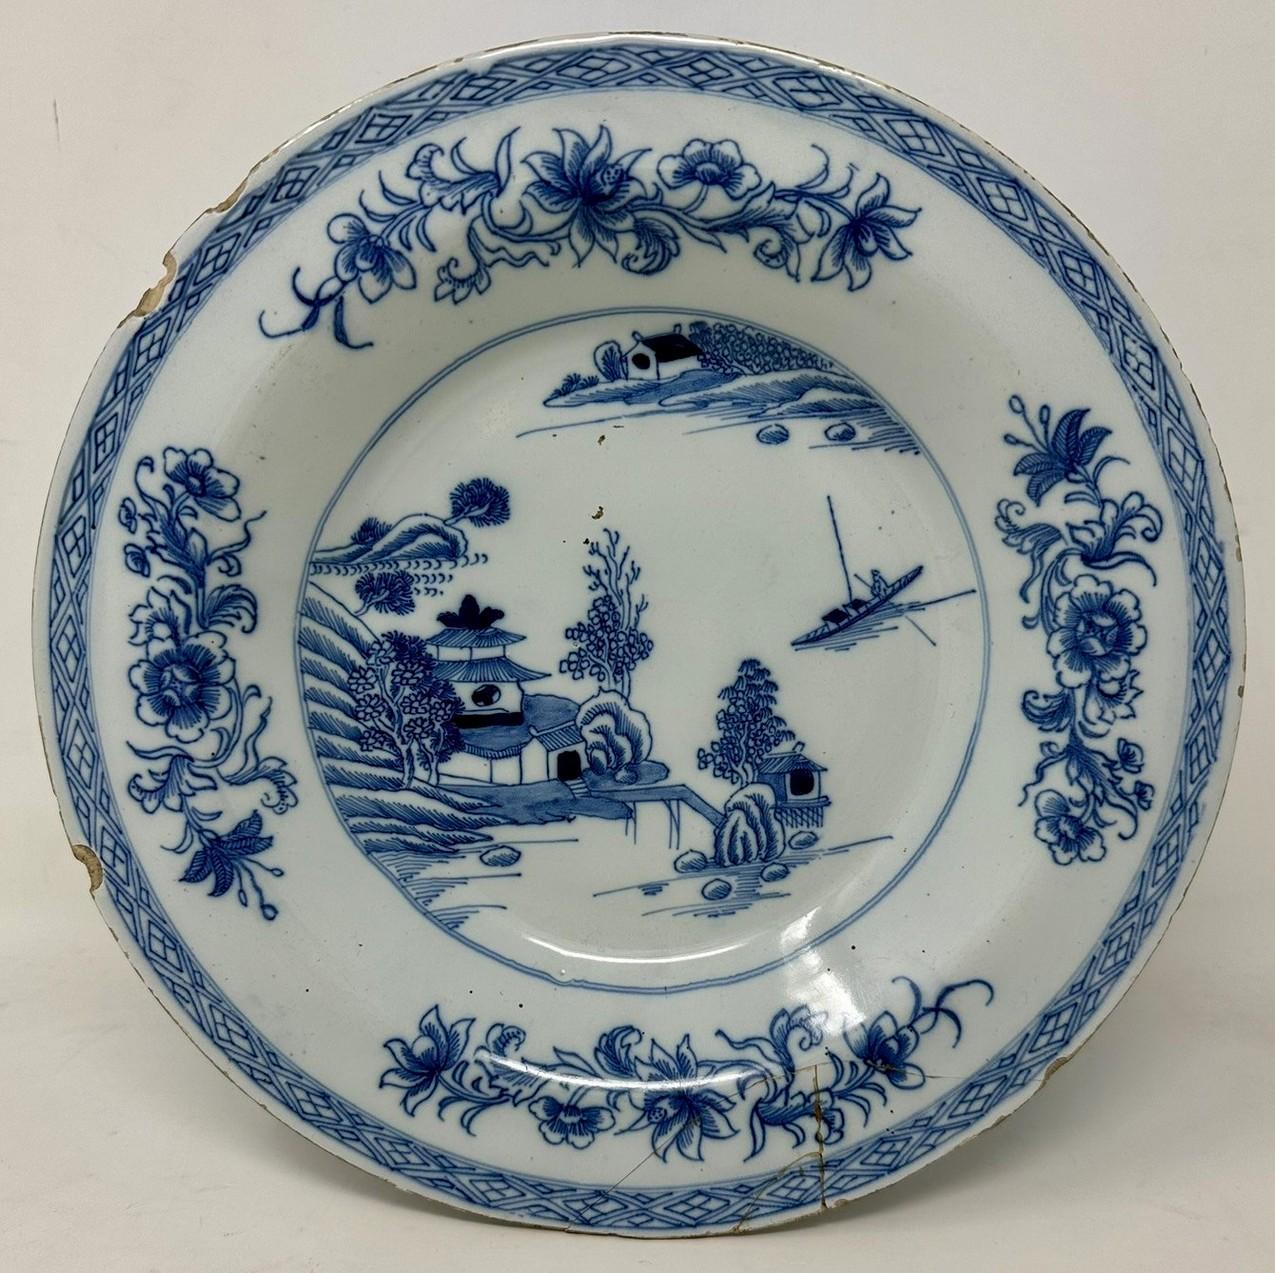 An Extremely Rare Pair Hand Decorated Irish Delft ware wall hanging Chargers or Cabinet Dublin Deep Dish Plates by Henry Delamain of circular form, each similarly decorated with central reserves depicting Chinese Scenes, outer rim areas with